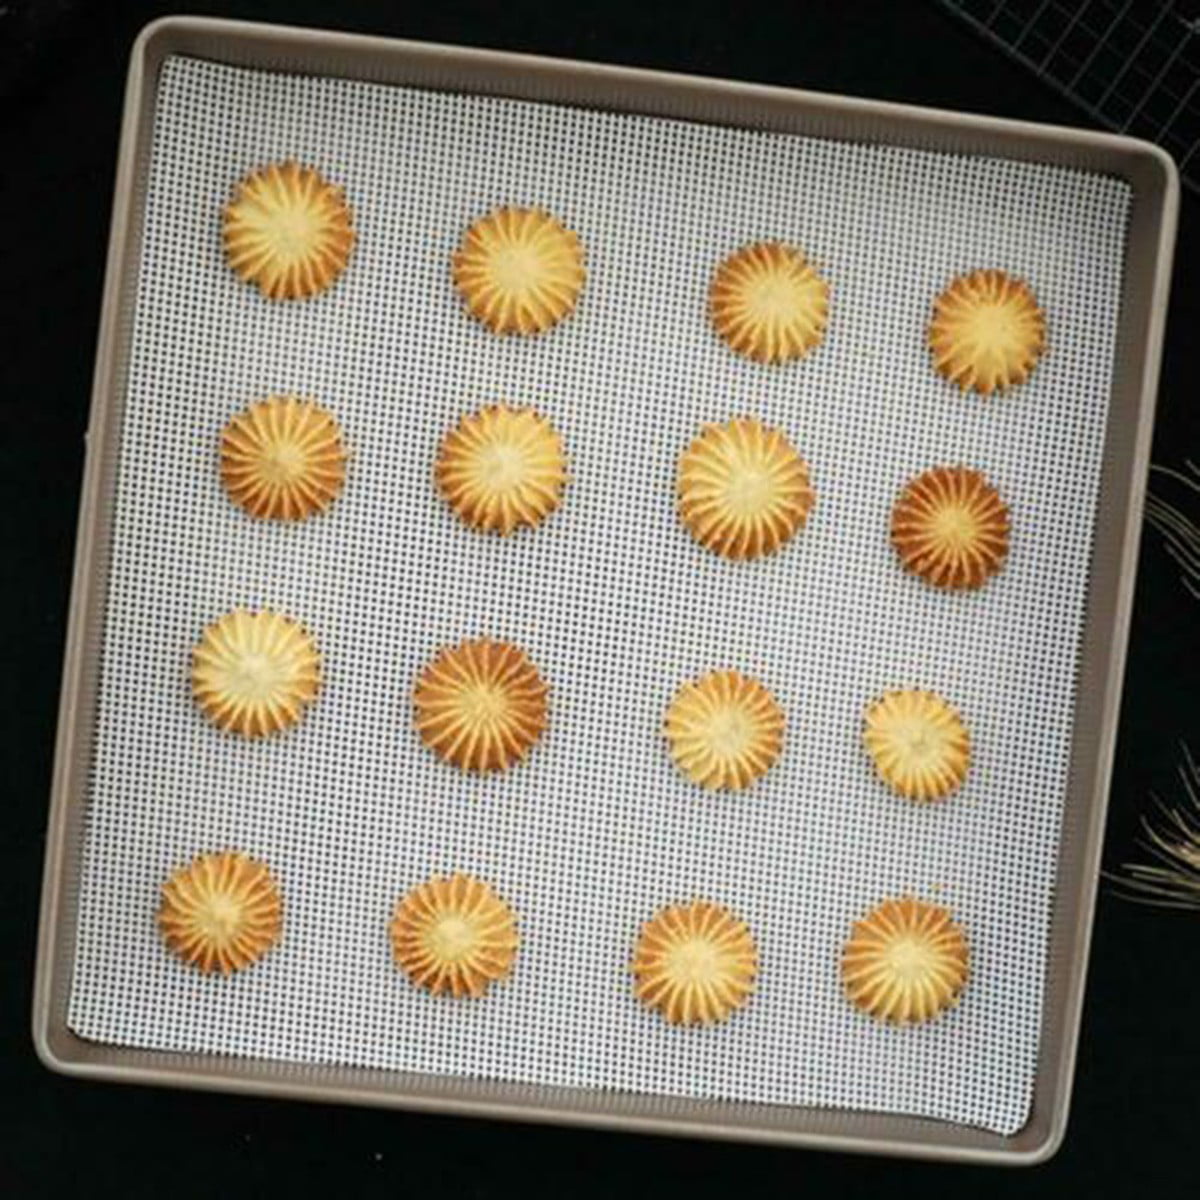 Non-Stick Silicone Mat Steamer Pad Dim Sum Paper Mesh Tools Cooking Kitchen F5W4